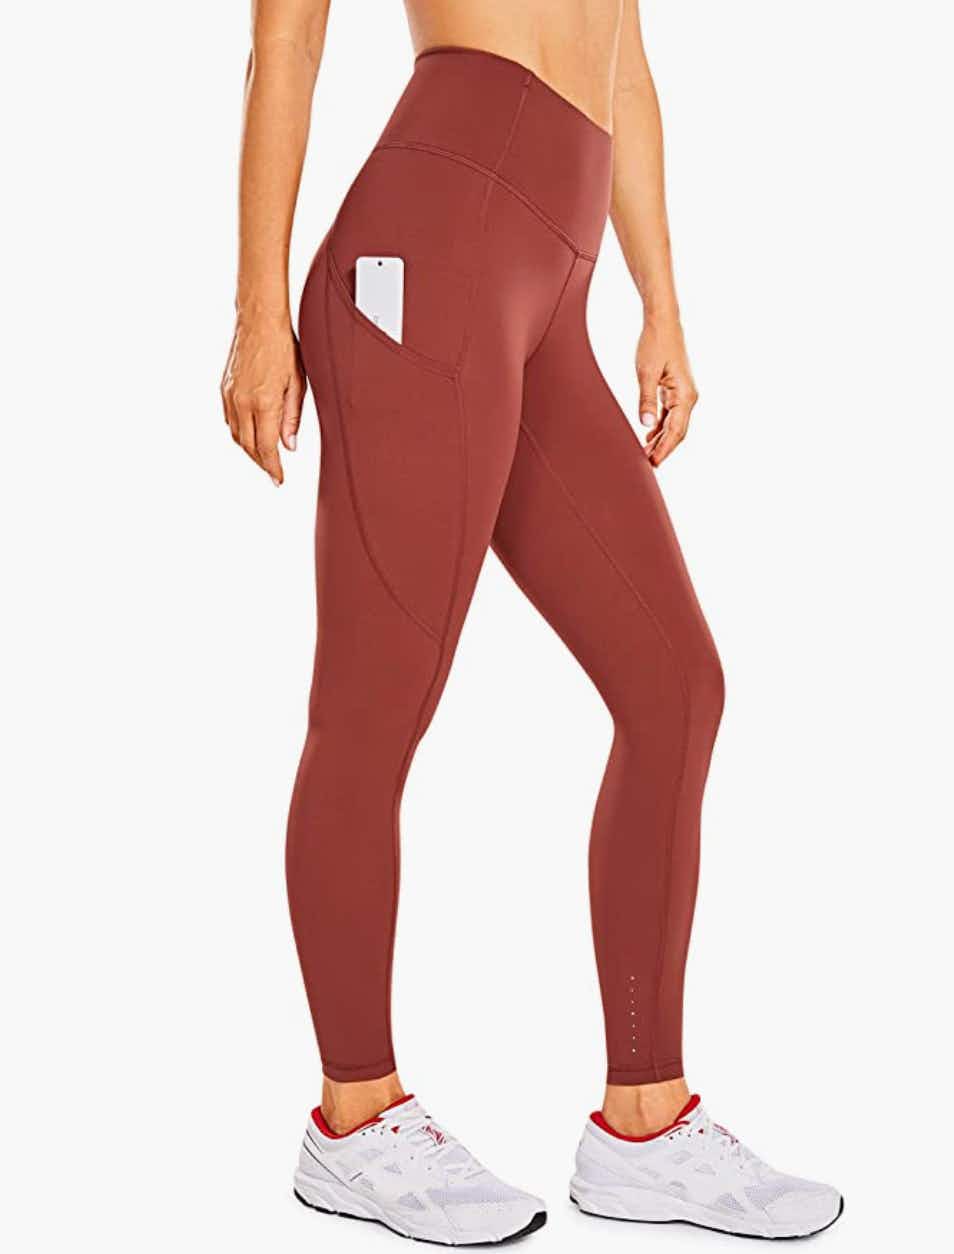 CRZ YOGA Women's Naked Feeling High Waist Yoga Pant with Pockets in Cognac Brown